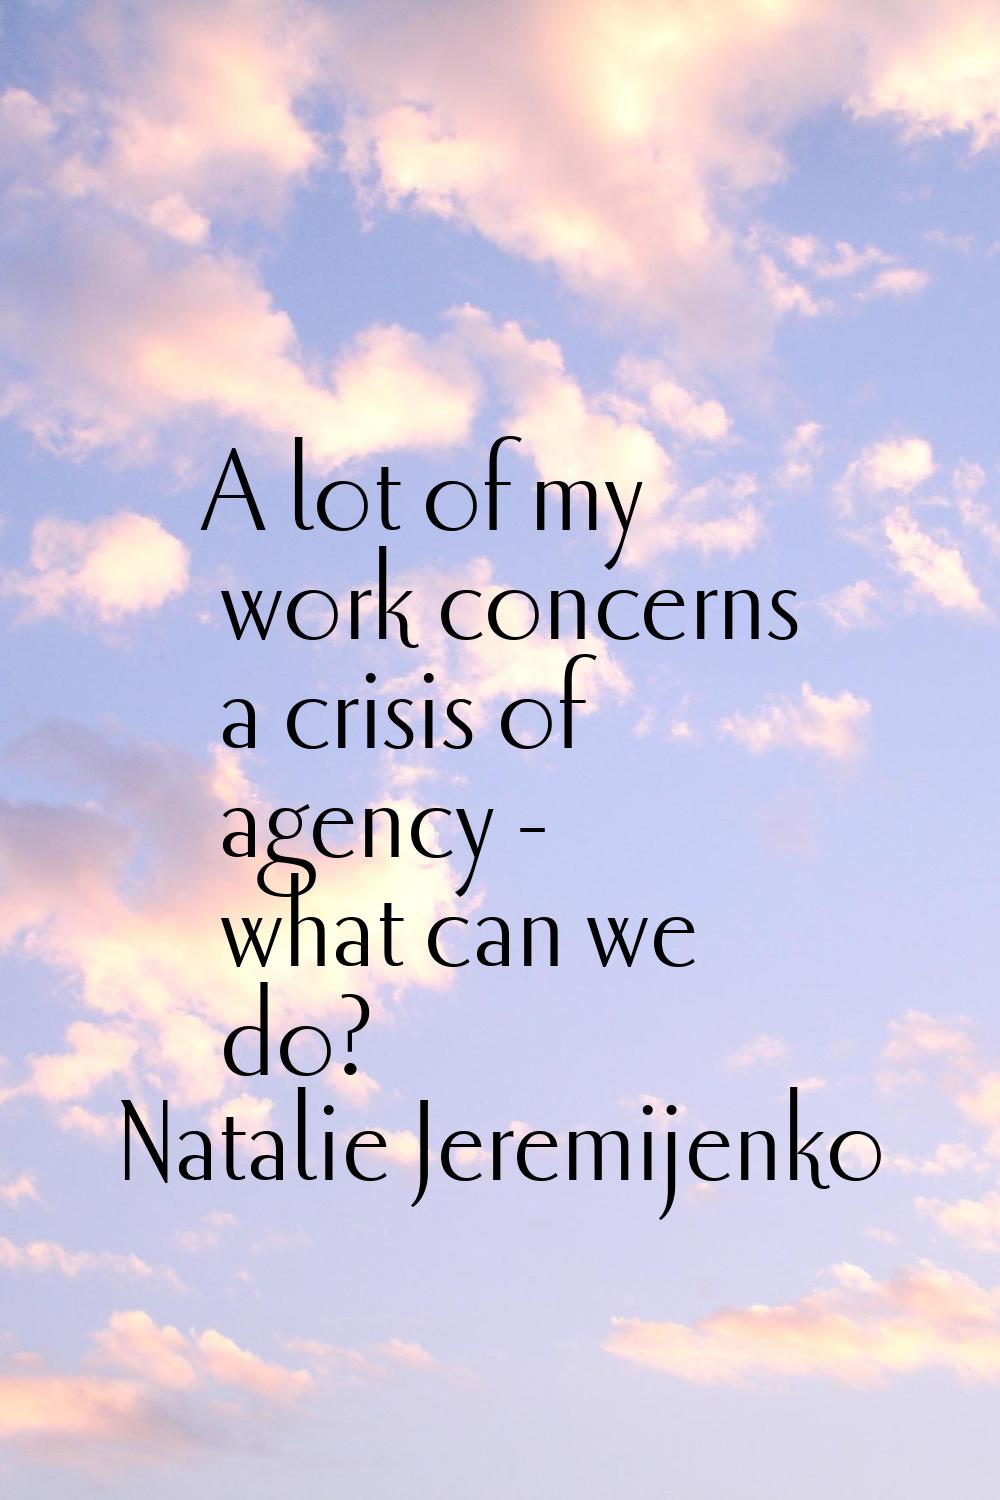 A lot of my work concerns a crisis of agency - what can we do?